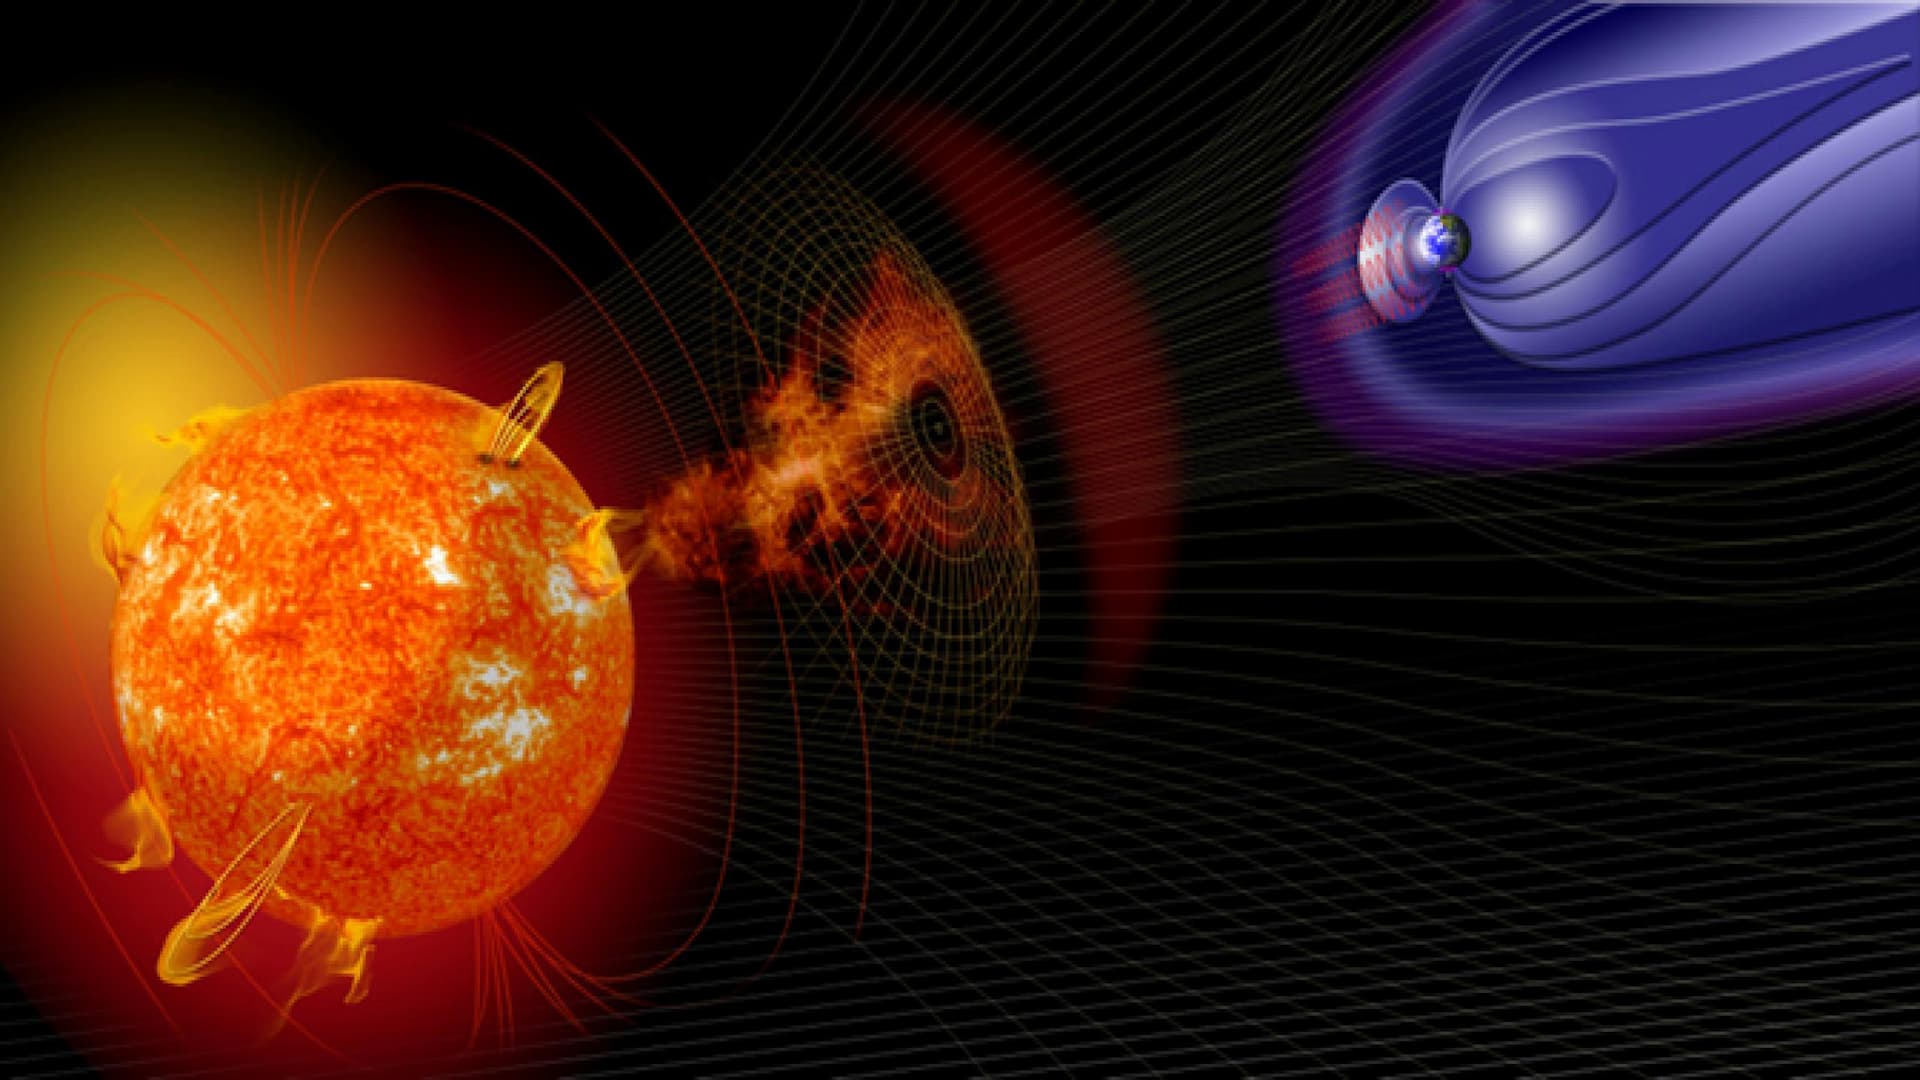 MoRe-ASI: “The Sun as a source of high-energy particles”